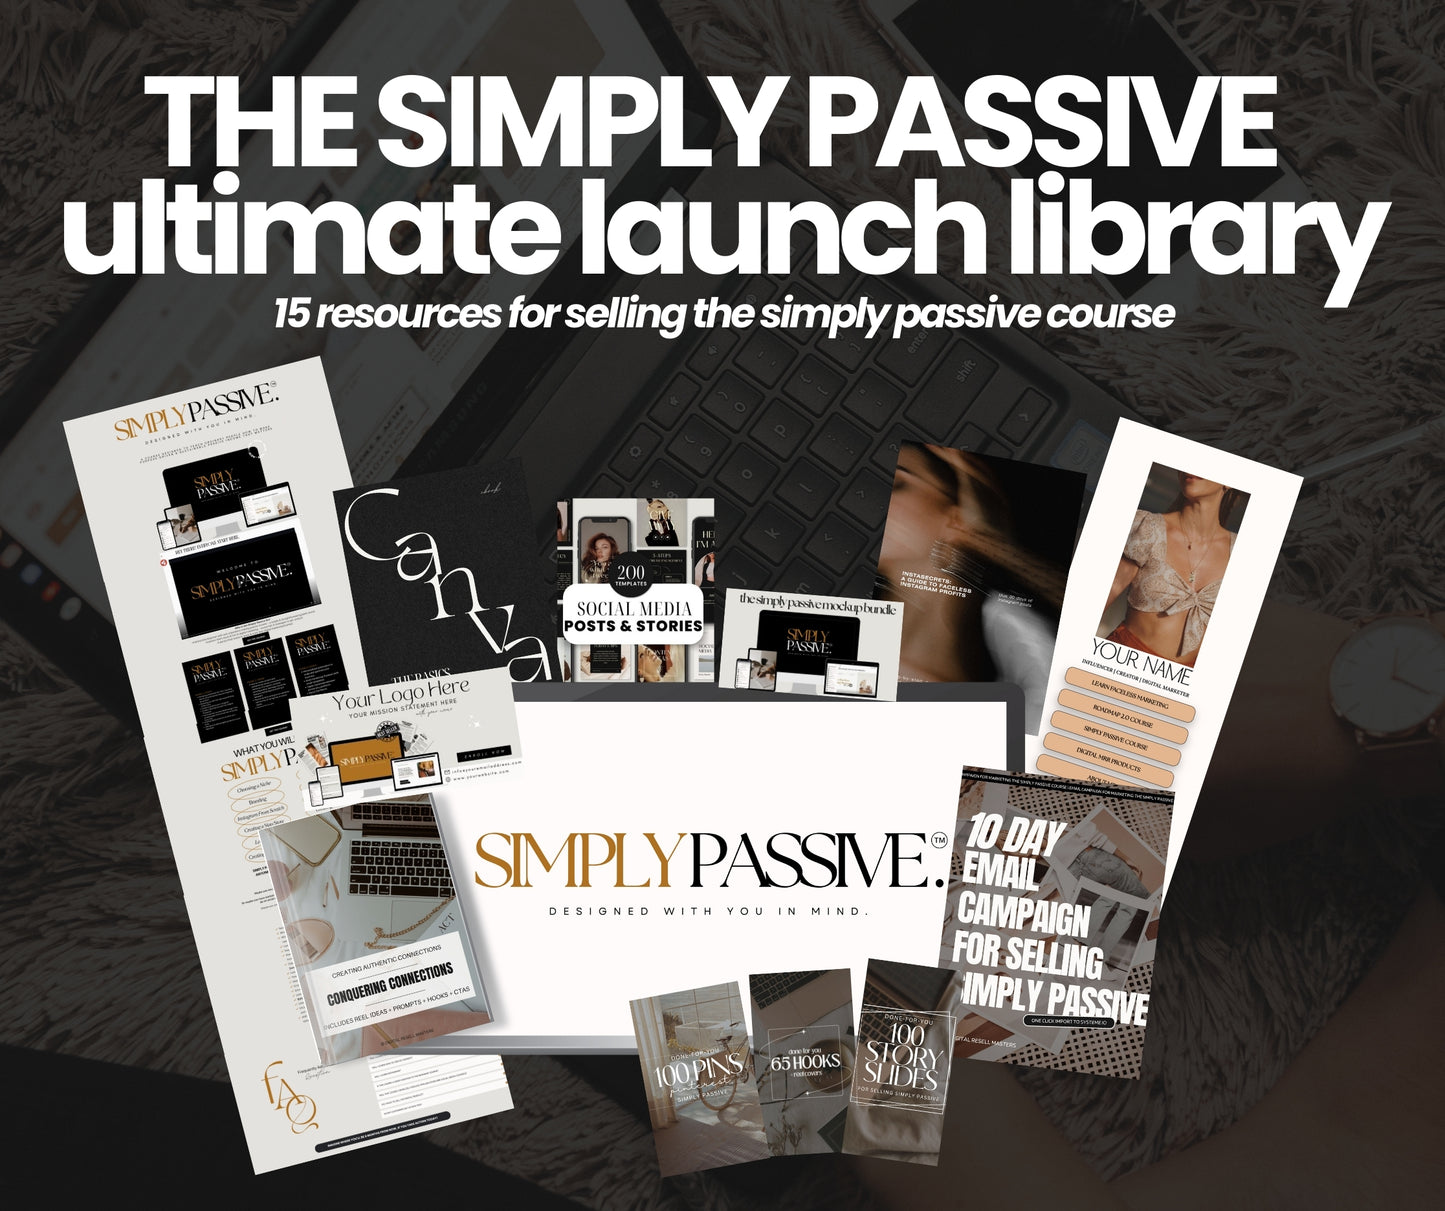 The Simply Passive Ultimate Launch Library